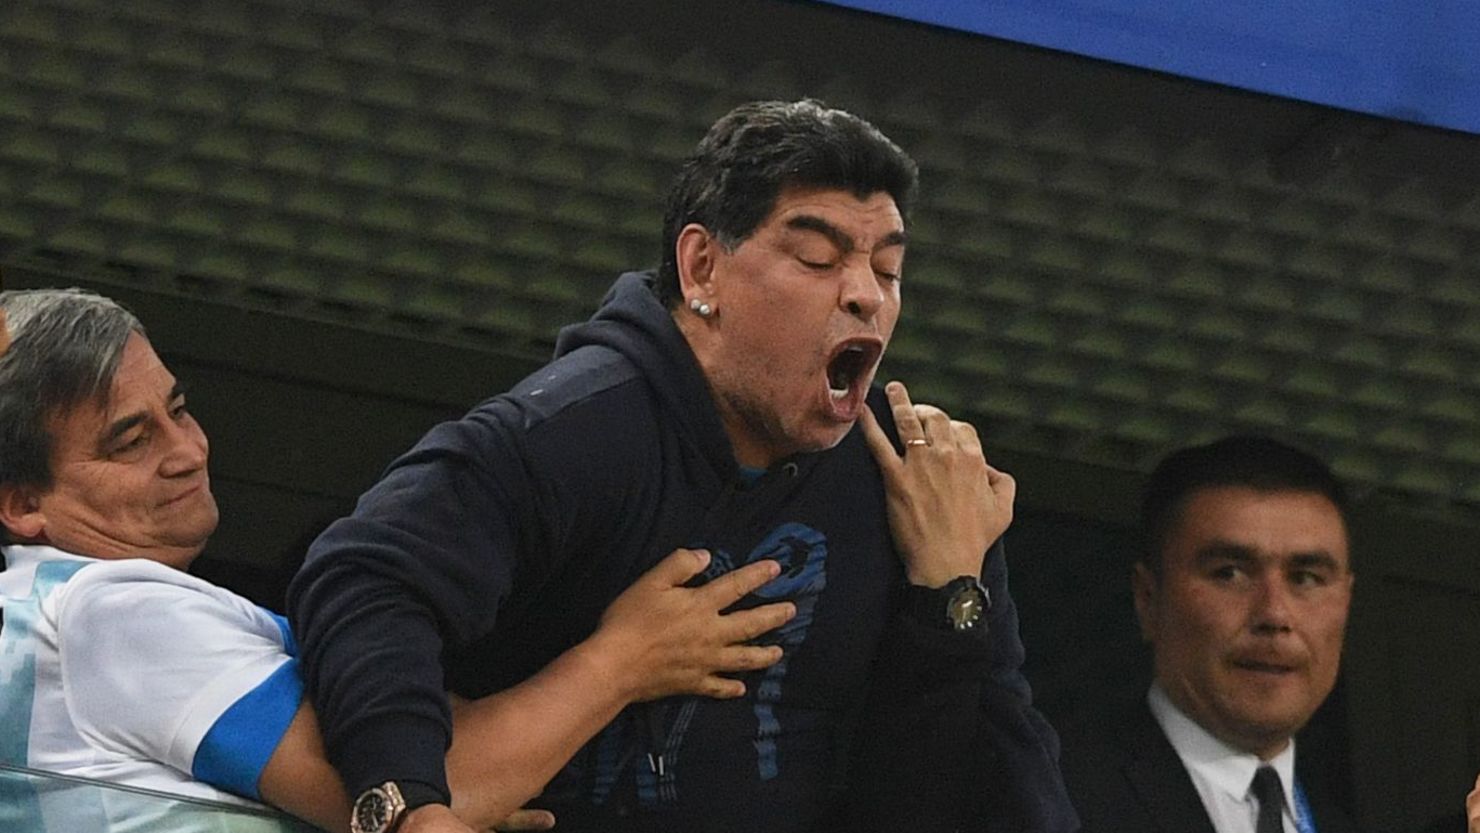 Retired Argentina player Diego Maradona (C) gestures during the Russia 2018 World Cup Group D football match between Nigeria and Argentina.